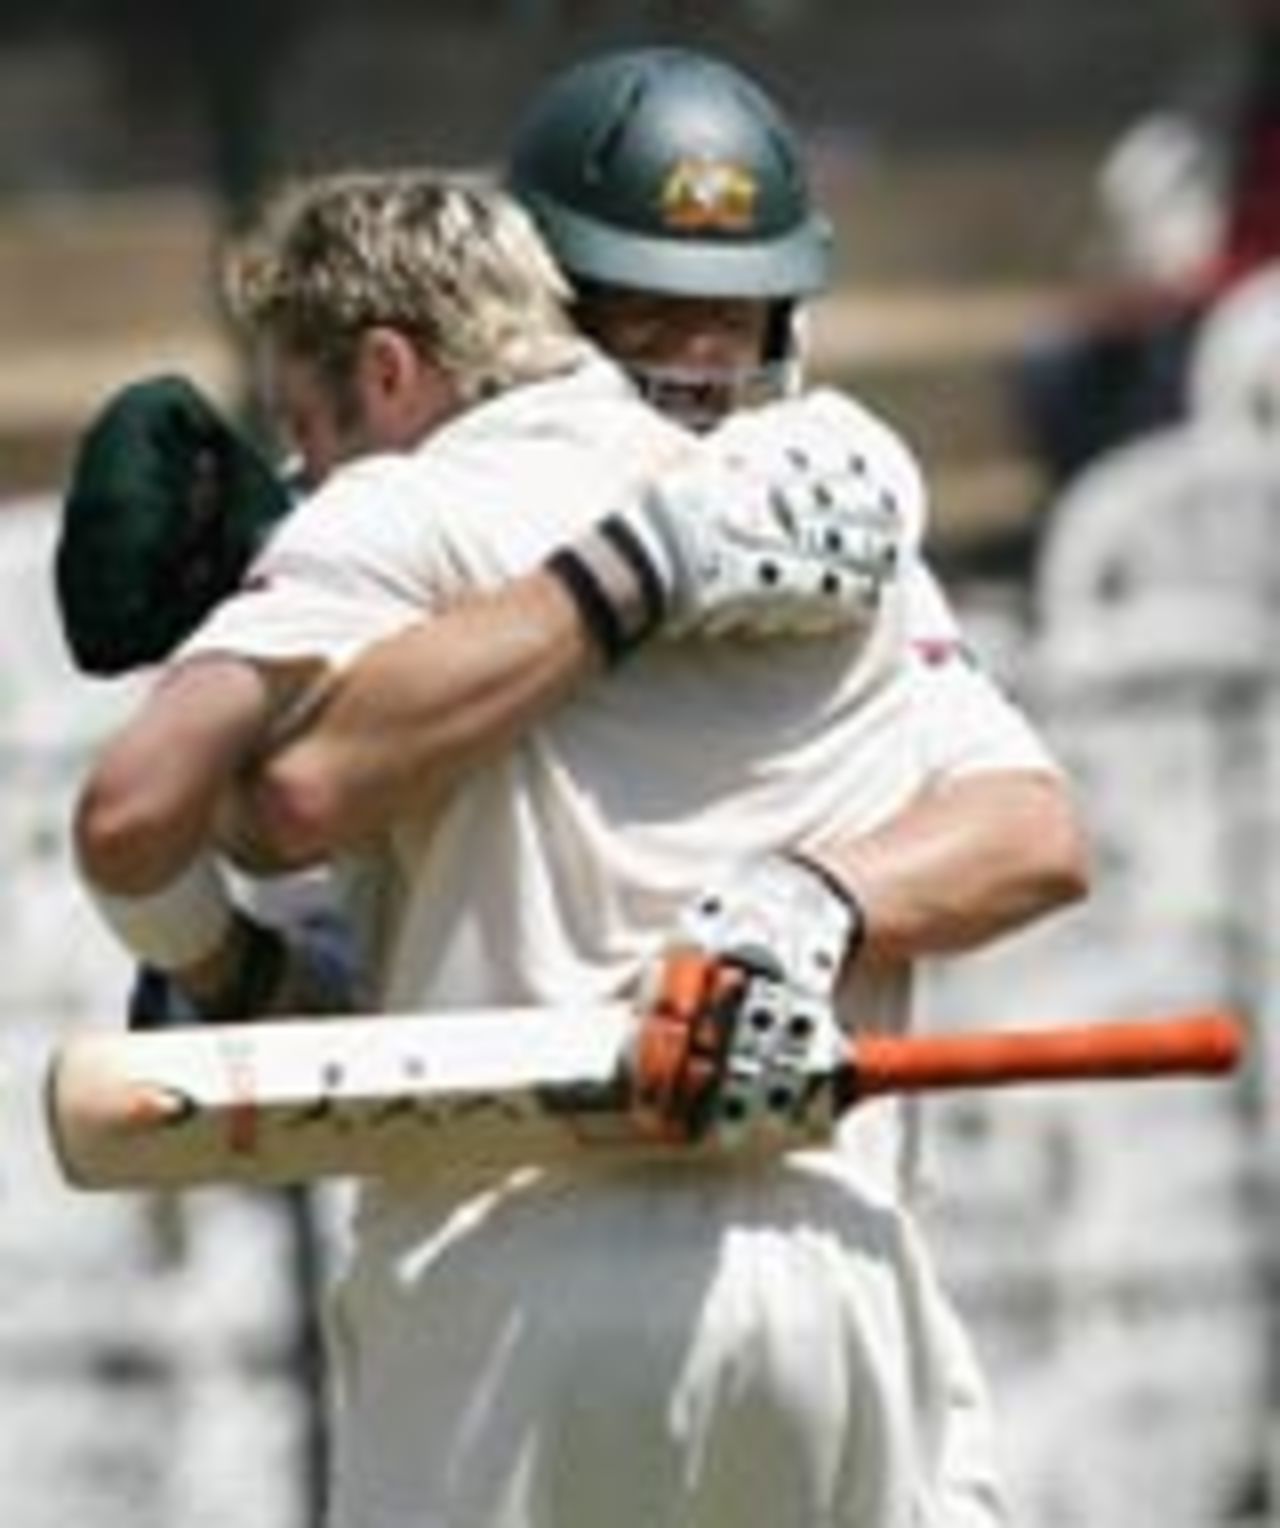 Adam Gilchrist hugs Michael Clarke after he scored a century on Test debut, Australia v India, 1st Test, Bangalore, 1st day, October 7, 2004